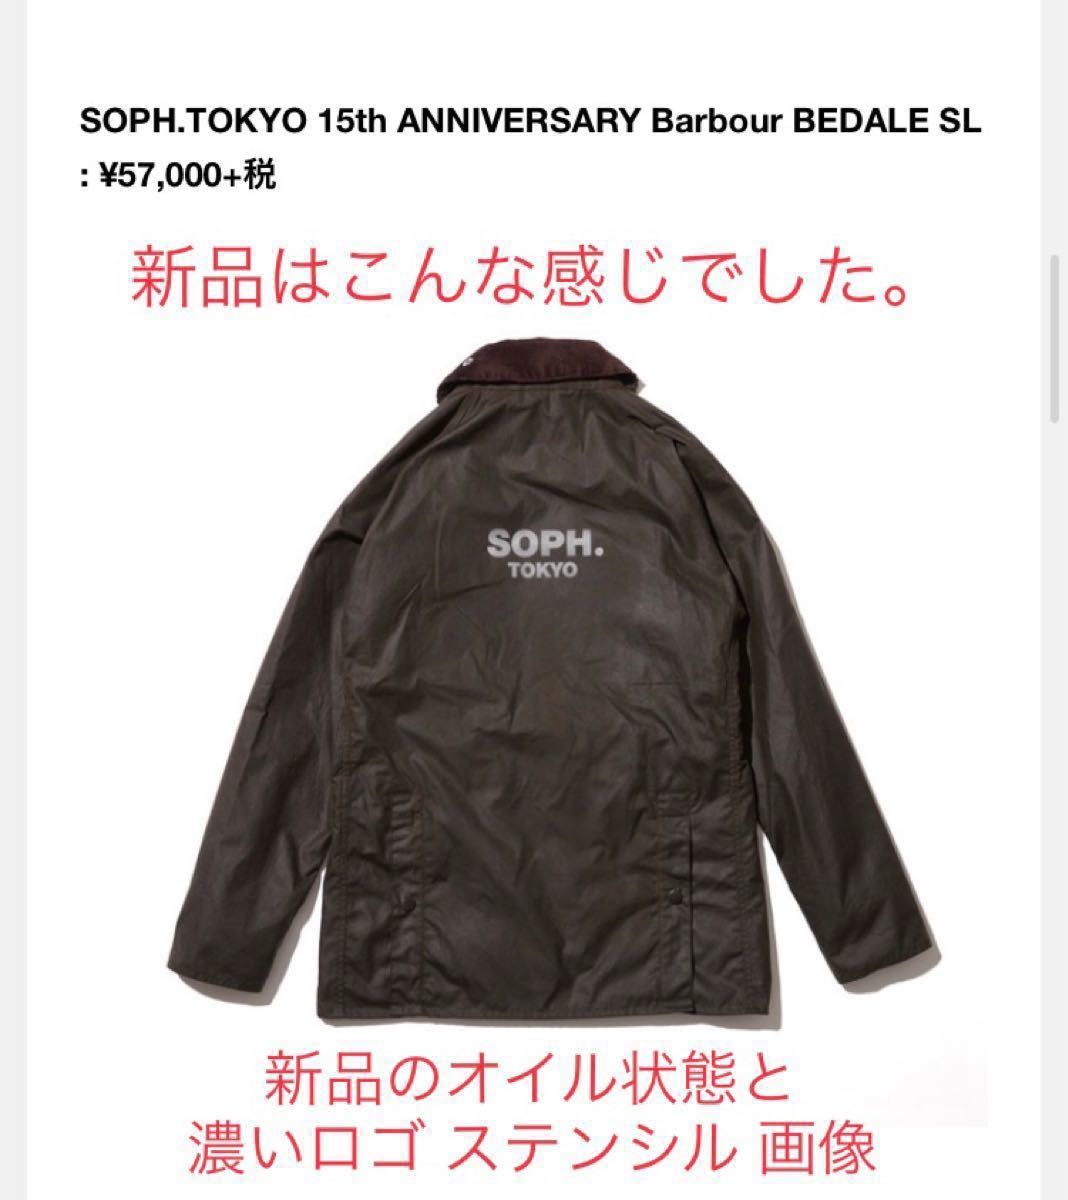 SOPH.TOKYO Barbour BEDALE SL 15th記念モデル-